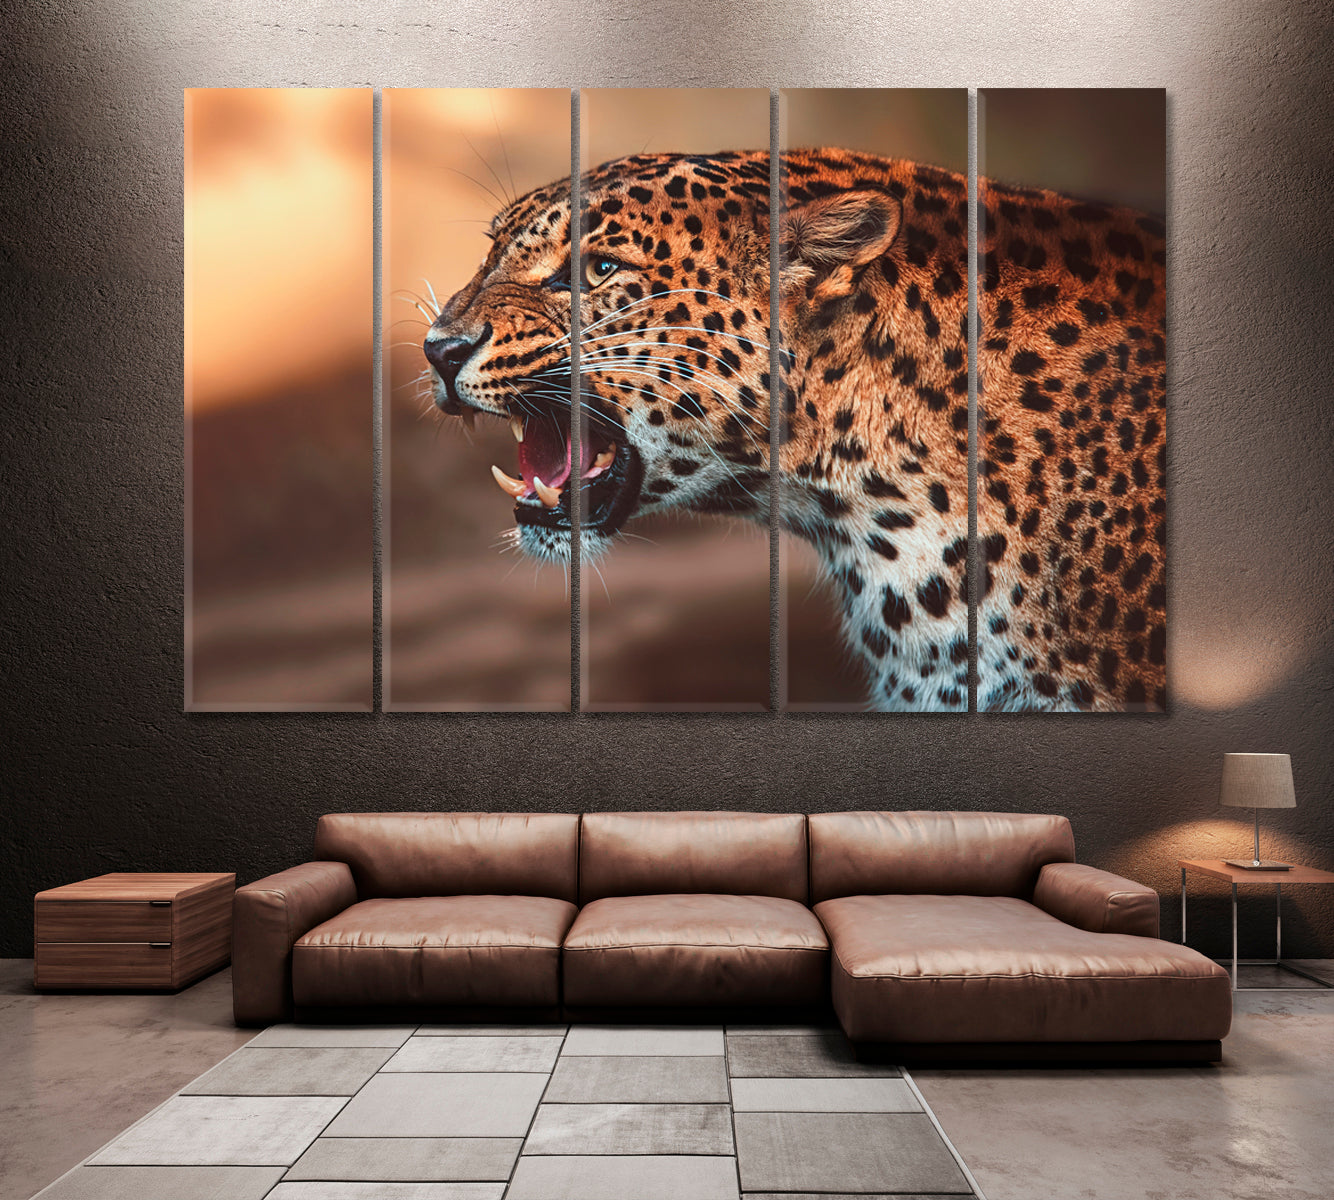 Angry Ceylon Leopard Canvas Print ArtLexy 5 Panels 36"x24" inches 